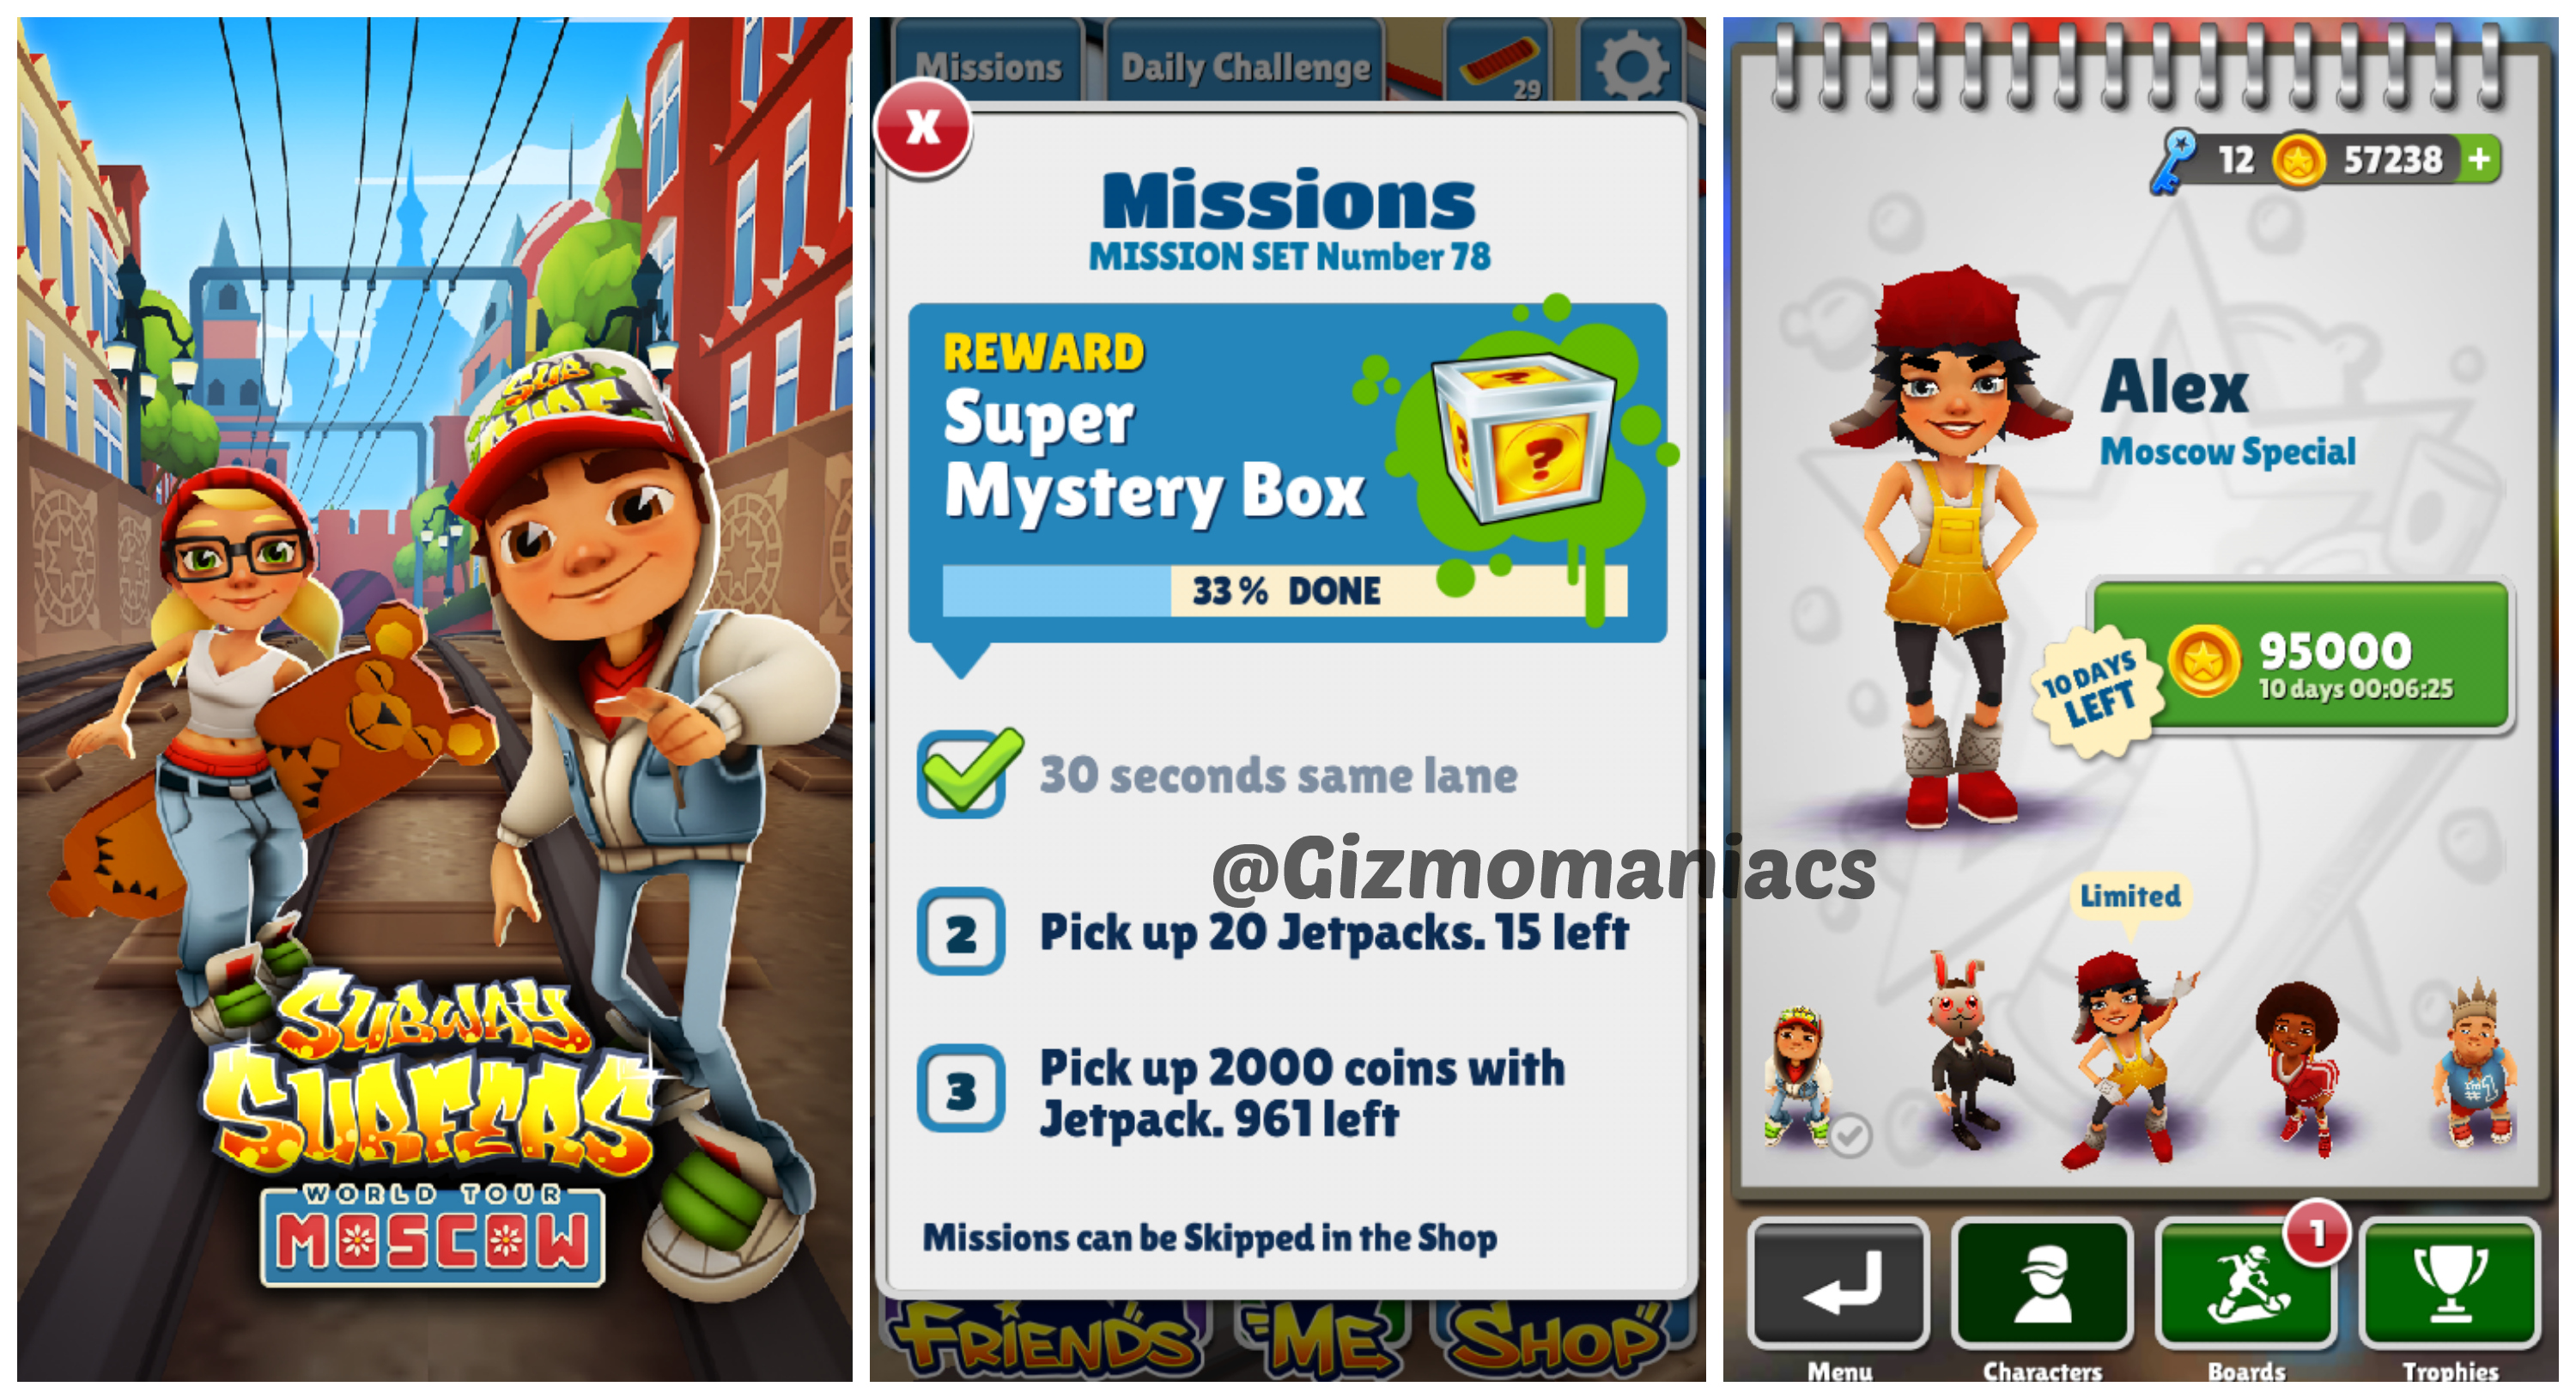 Subway surfers: World tour Moscow Download APK for Android (Free